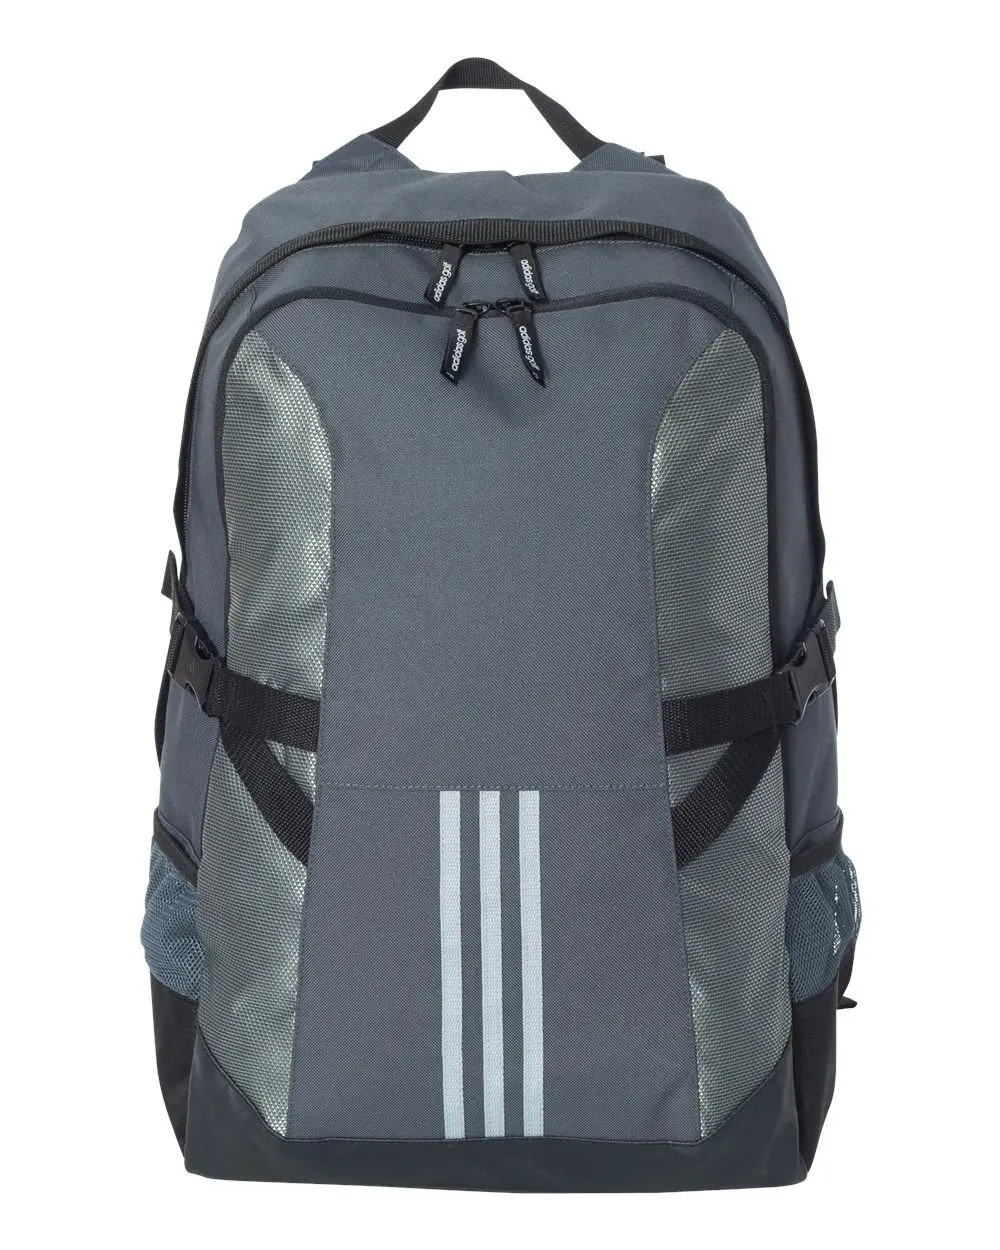 Cheap Adidas Backpack, find Adidas Backpack deals on line at Alibaba.com